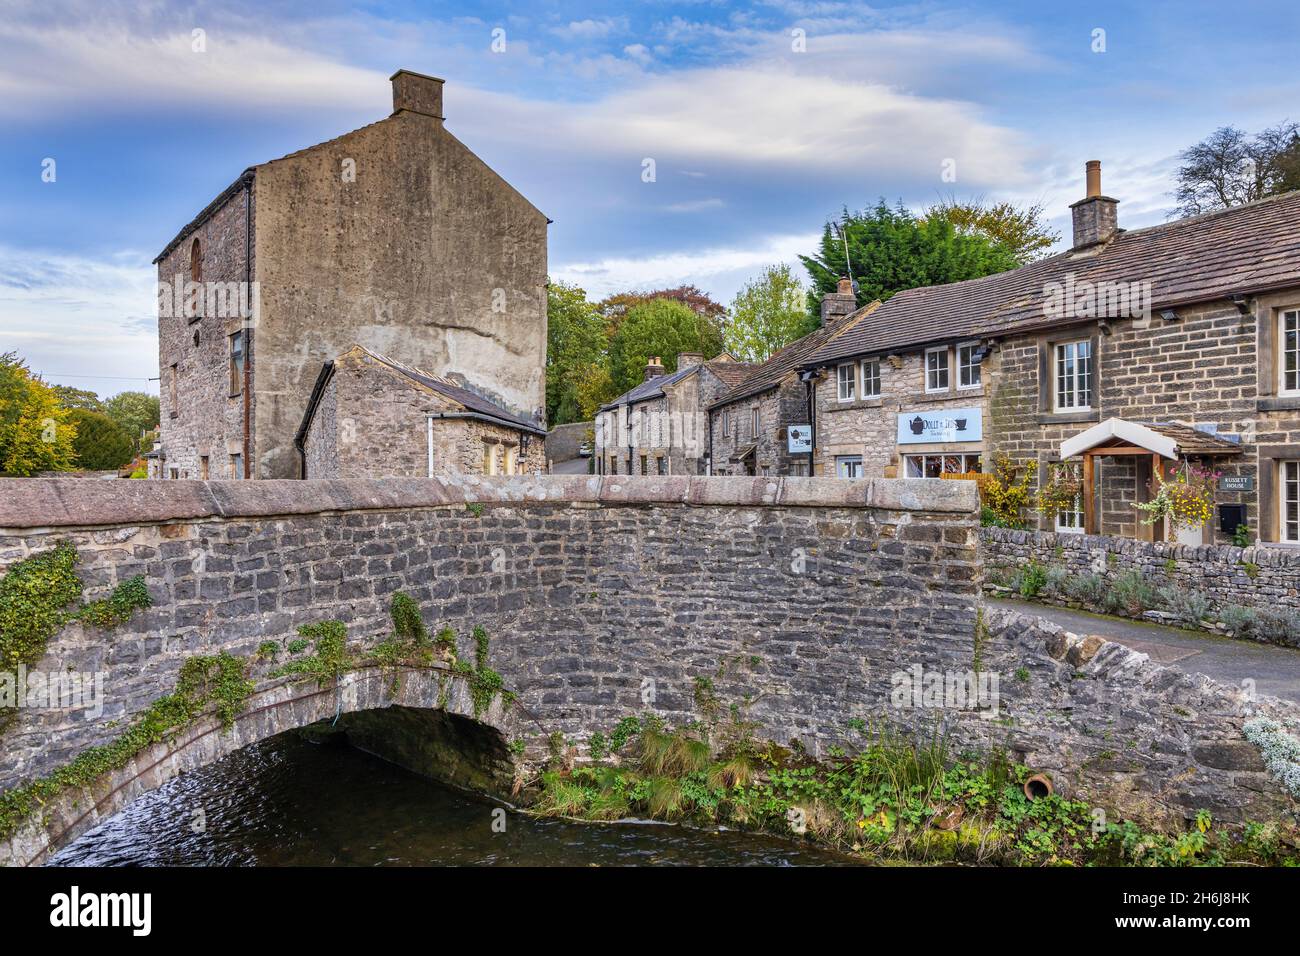 Bridge over Peakshole Water, a stream flowing through the picturesque village of Castleton to join the River Noe, in the Peak District. Derbyshire. Stock Photo